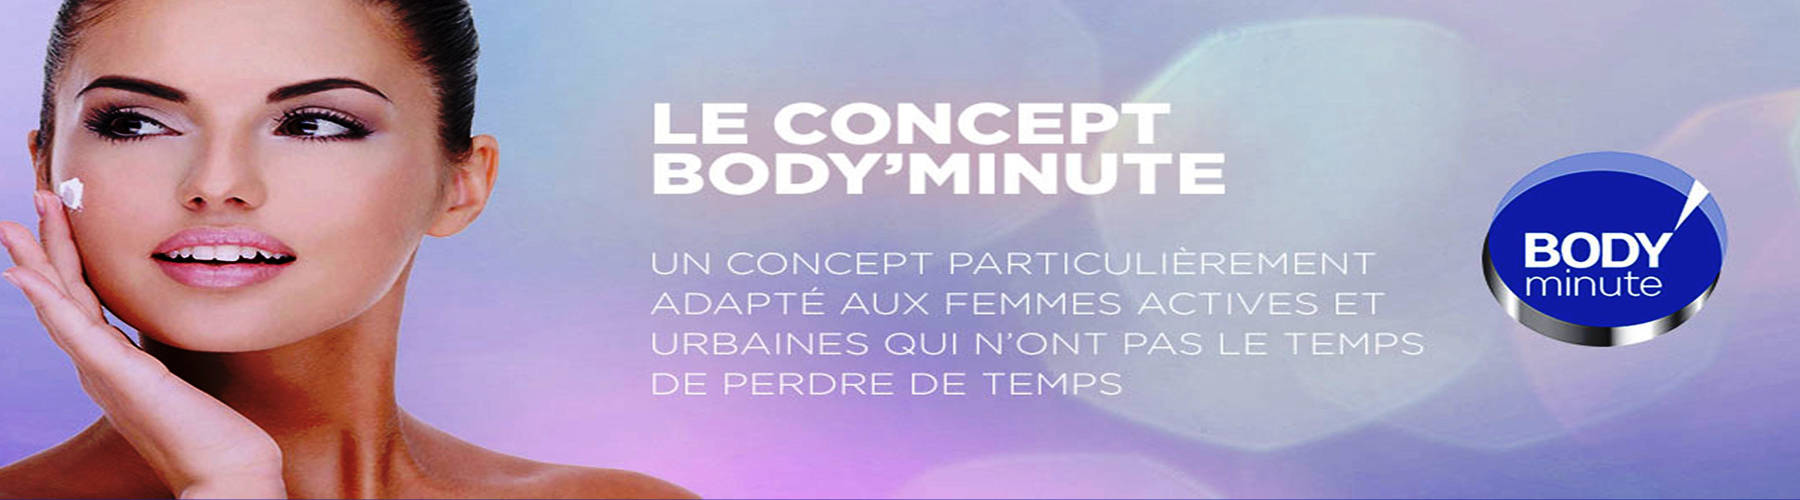 body minute pour homme